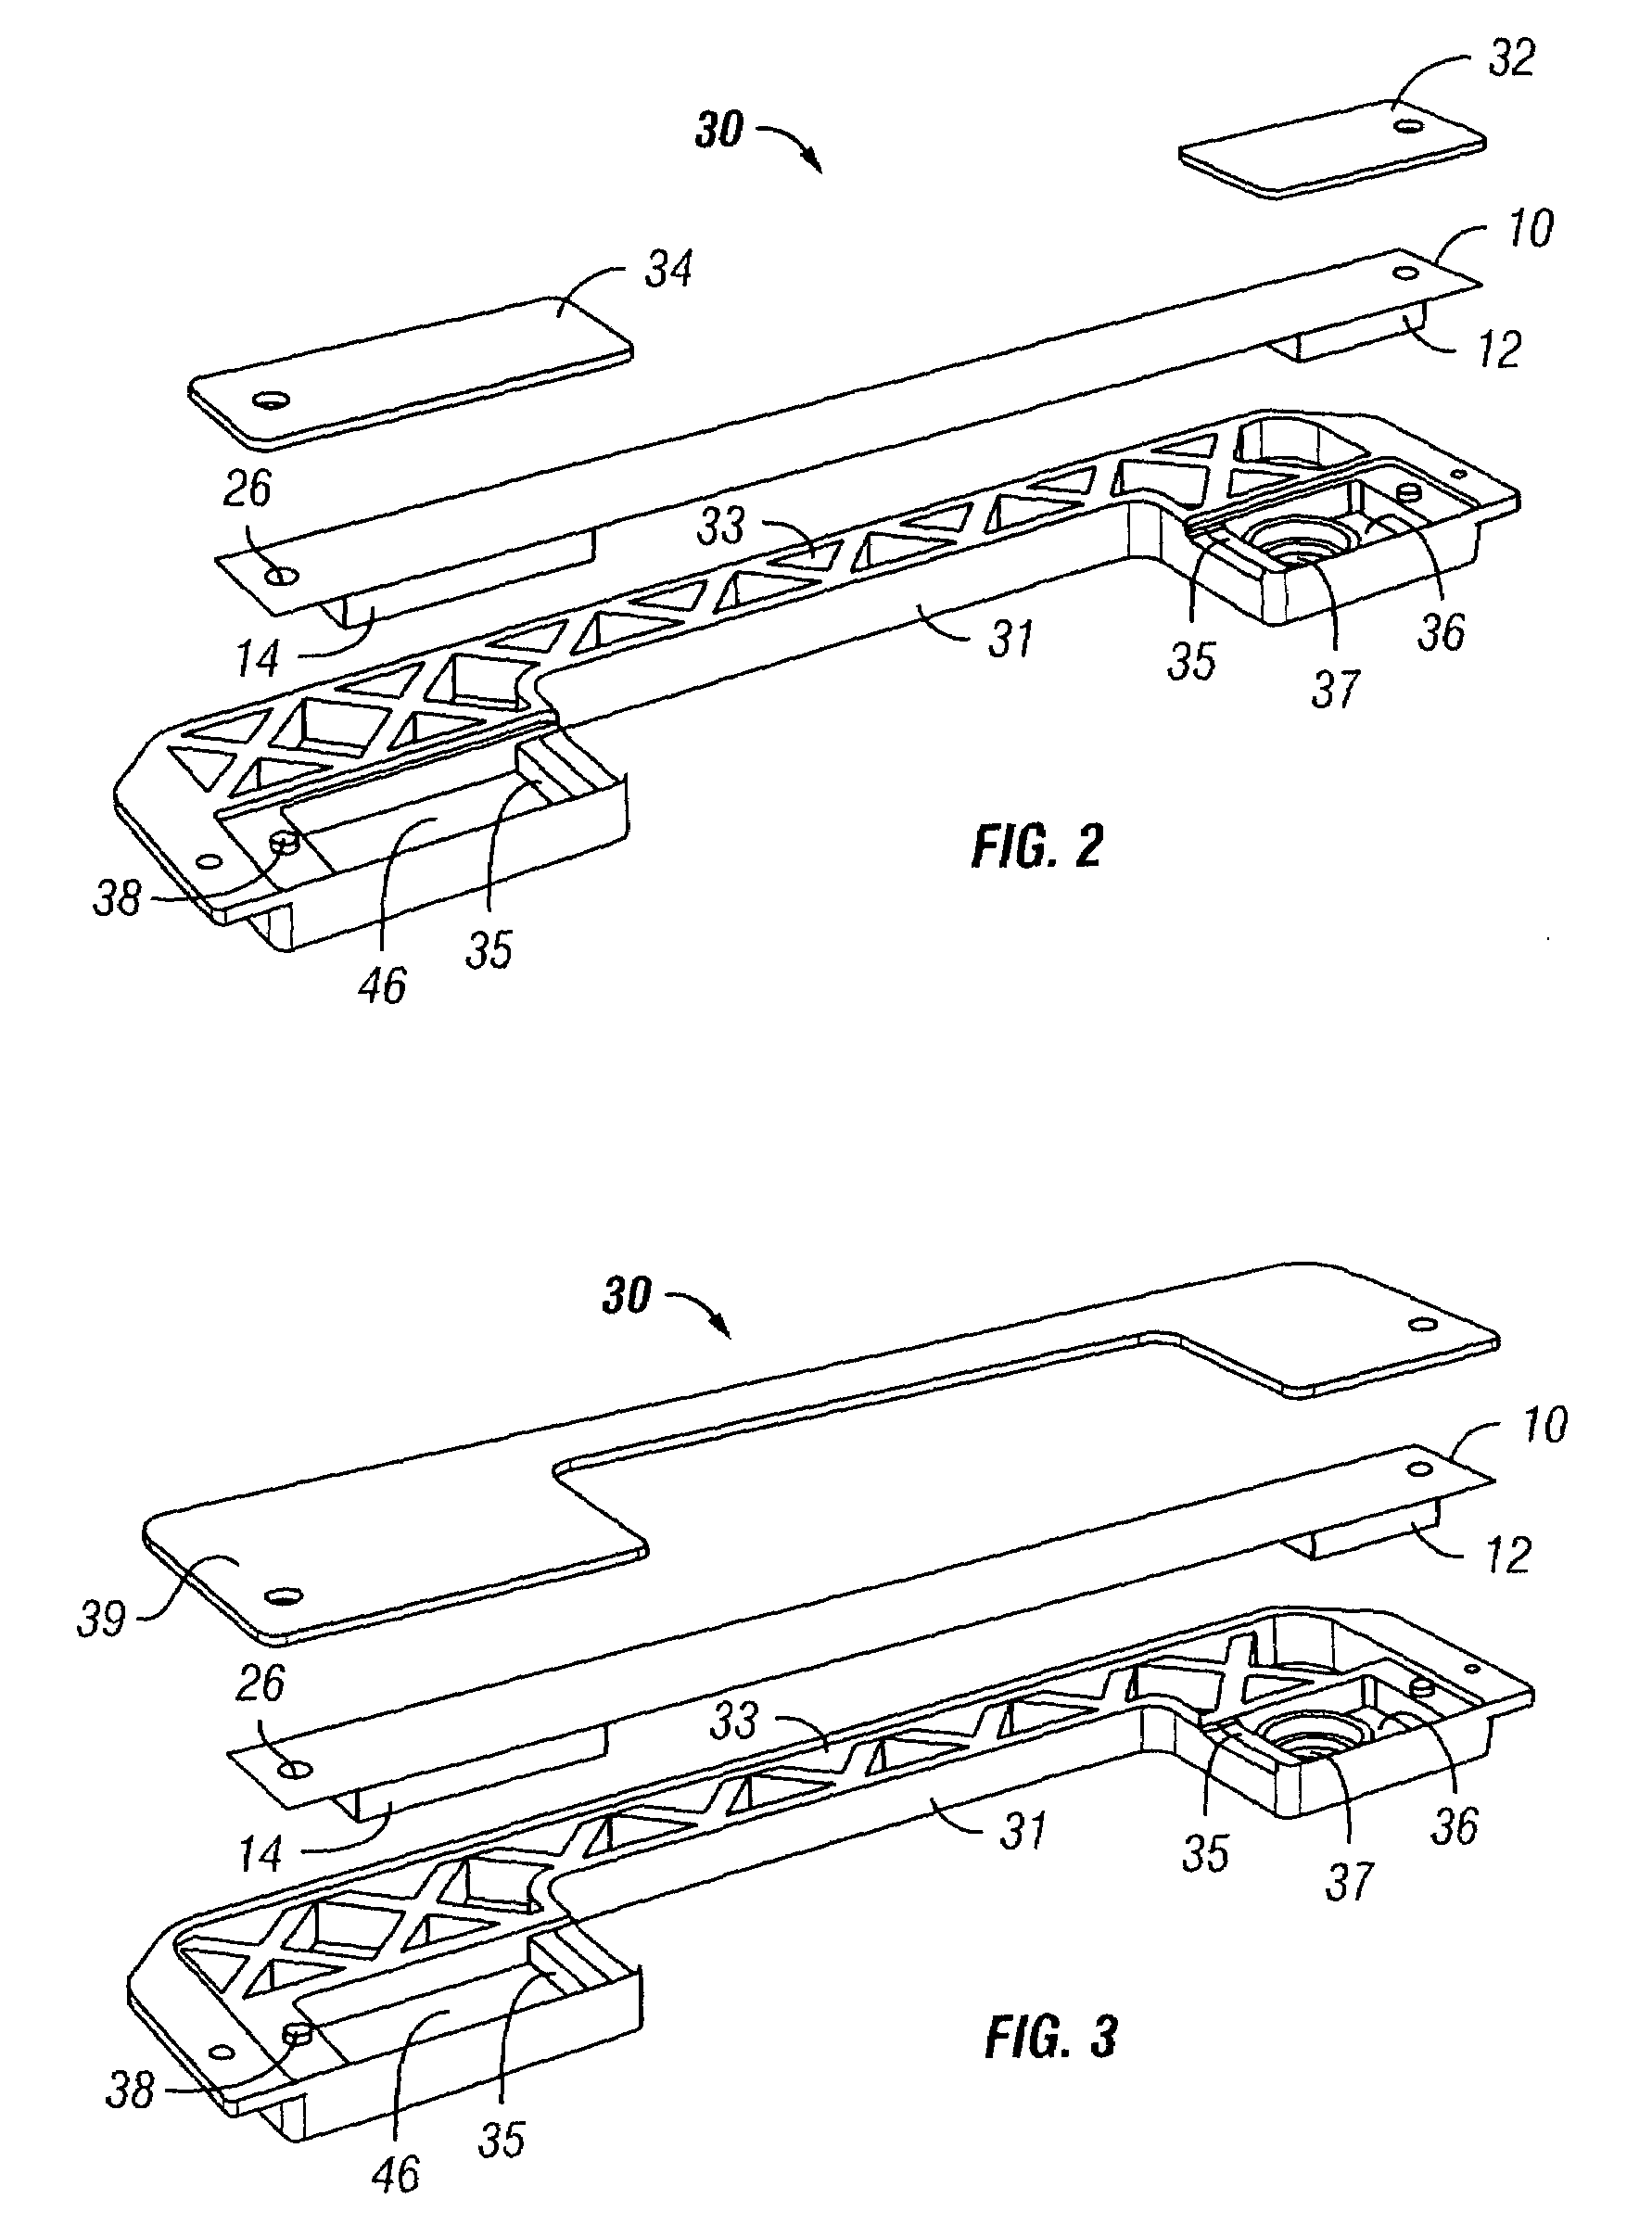 Accessible assay and method of use